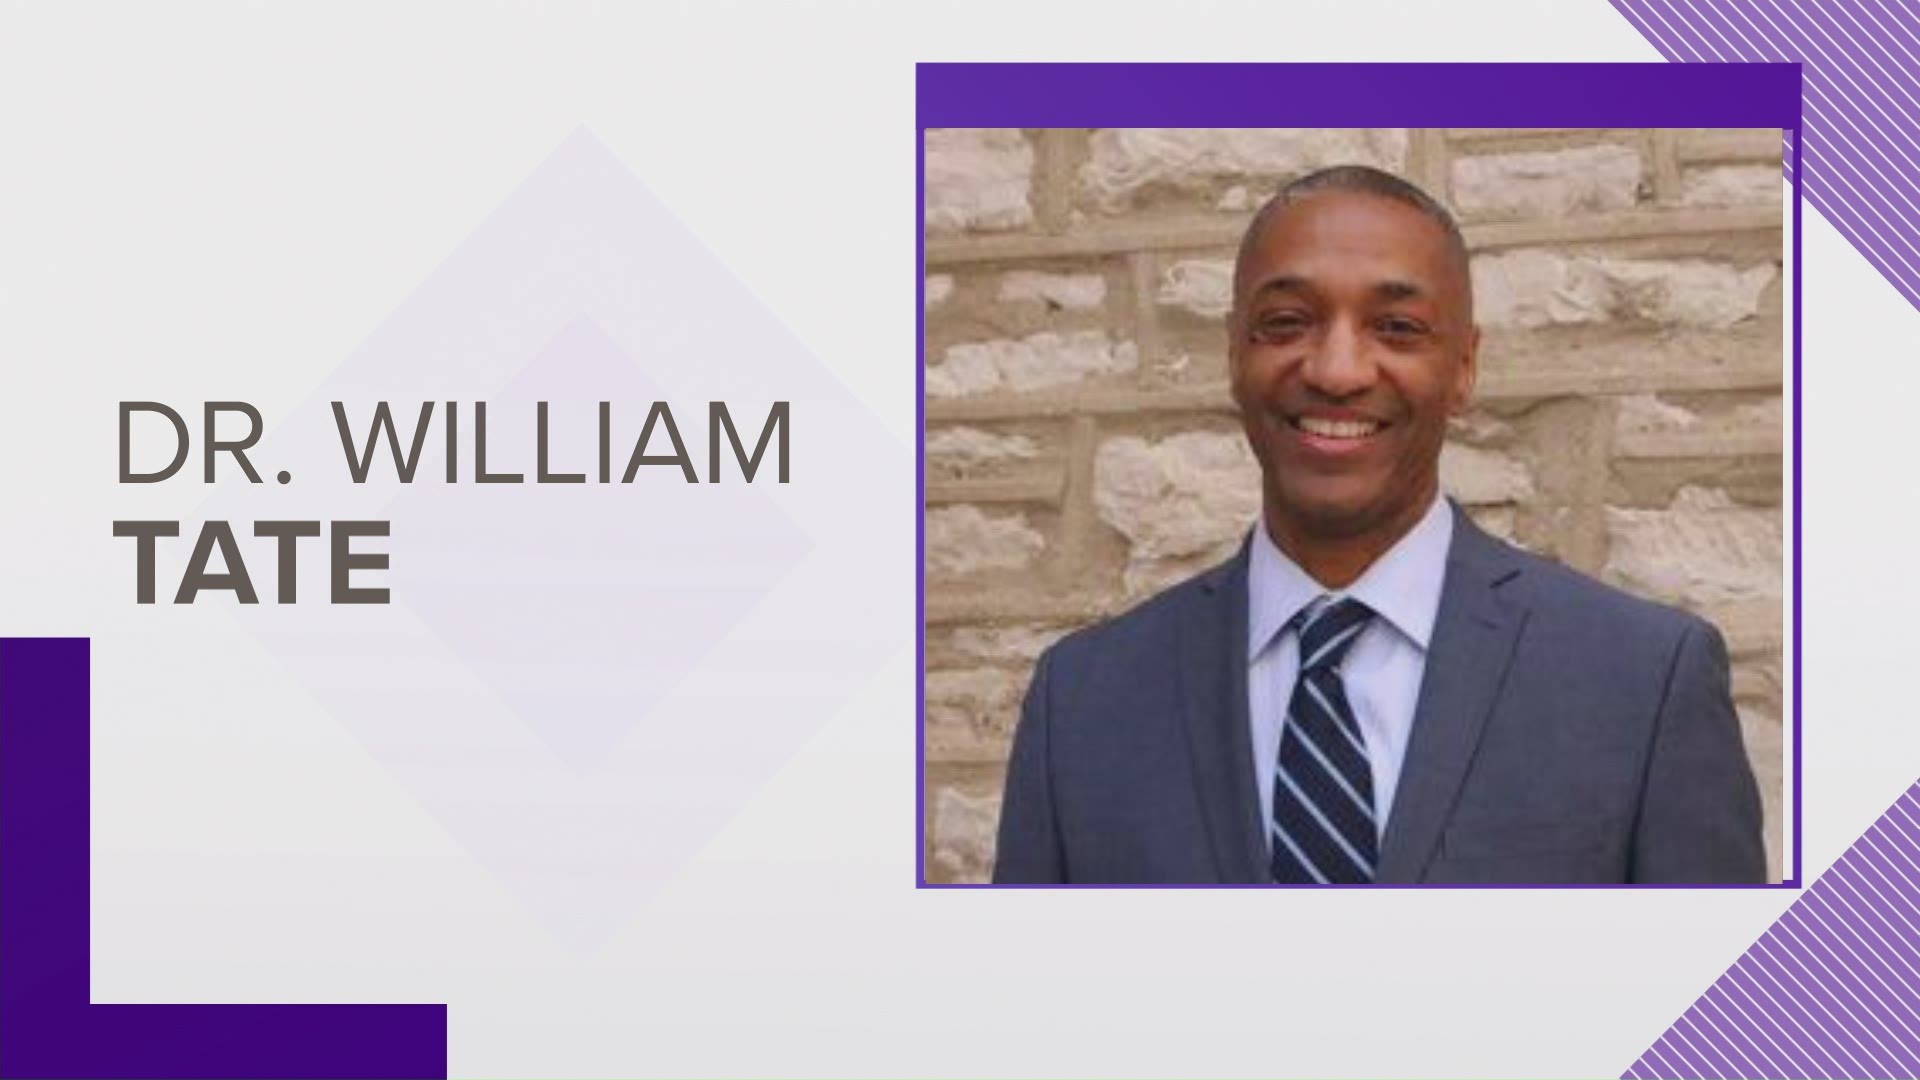 Dr. William F. Tate has been named as LSU's new president and will be in charge of several institutions in the college's system.